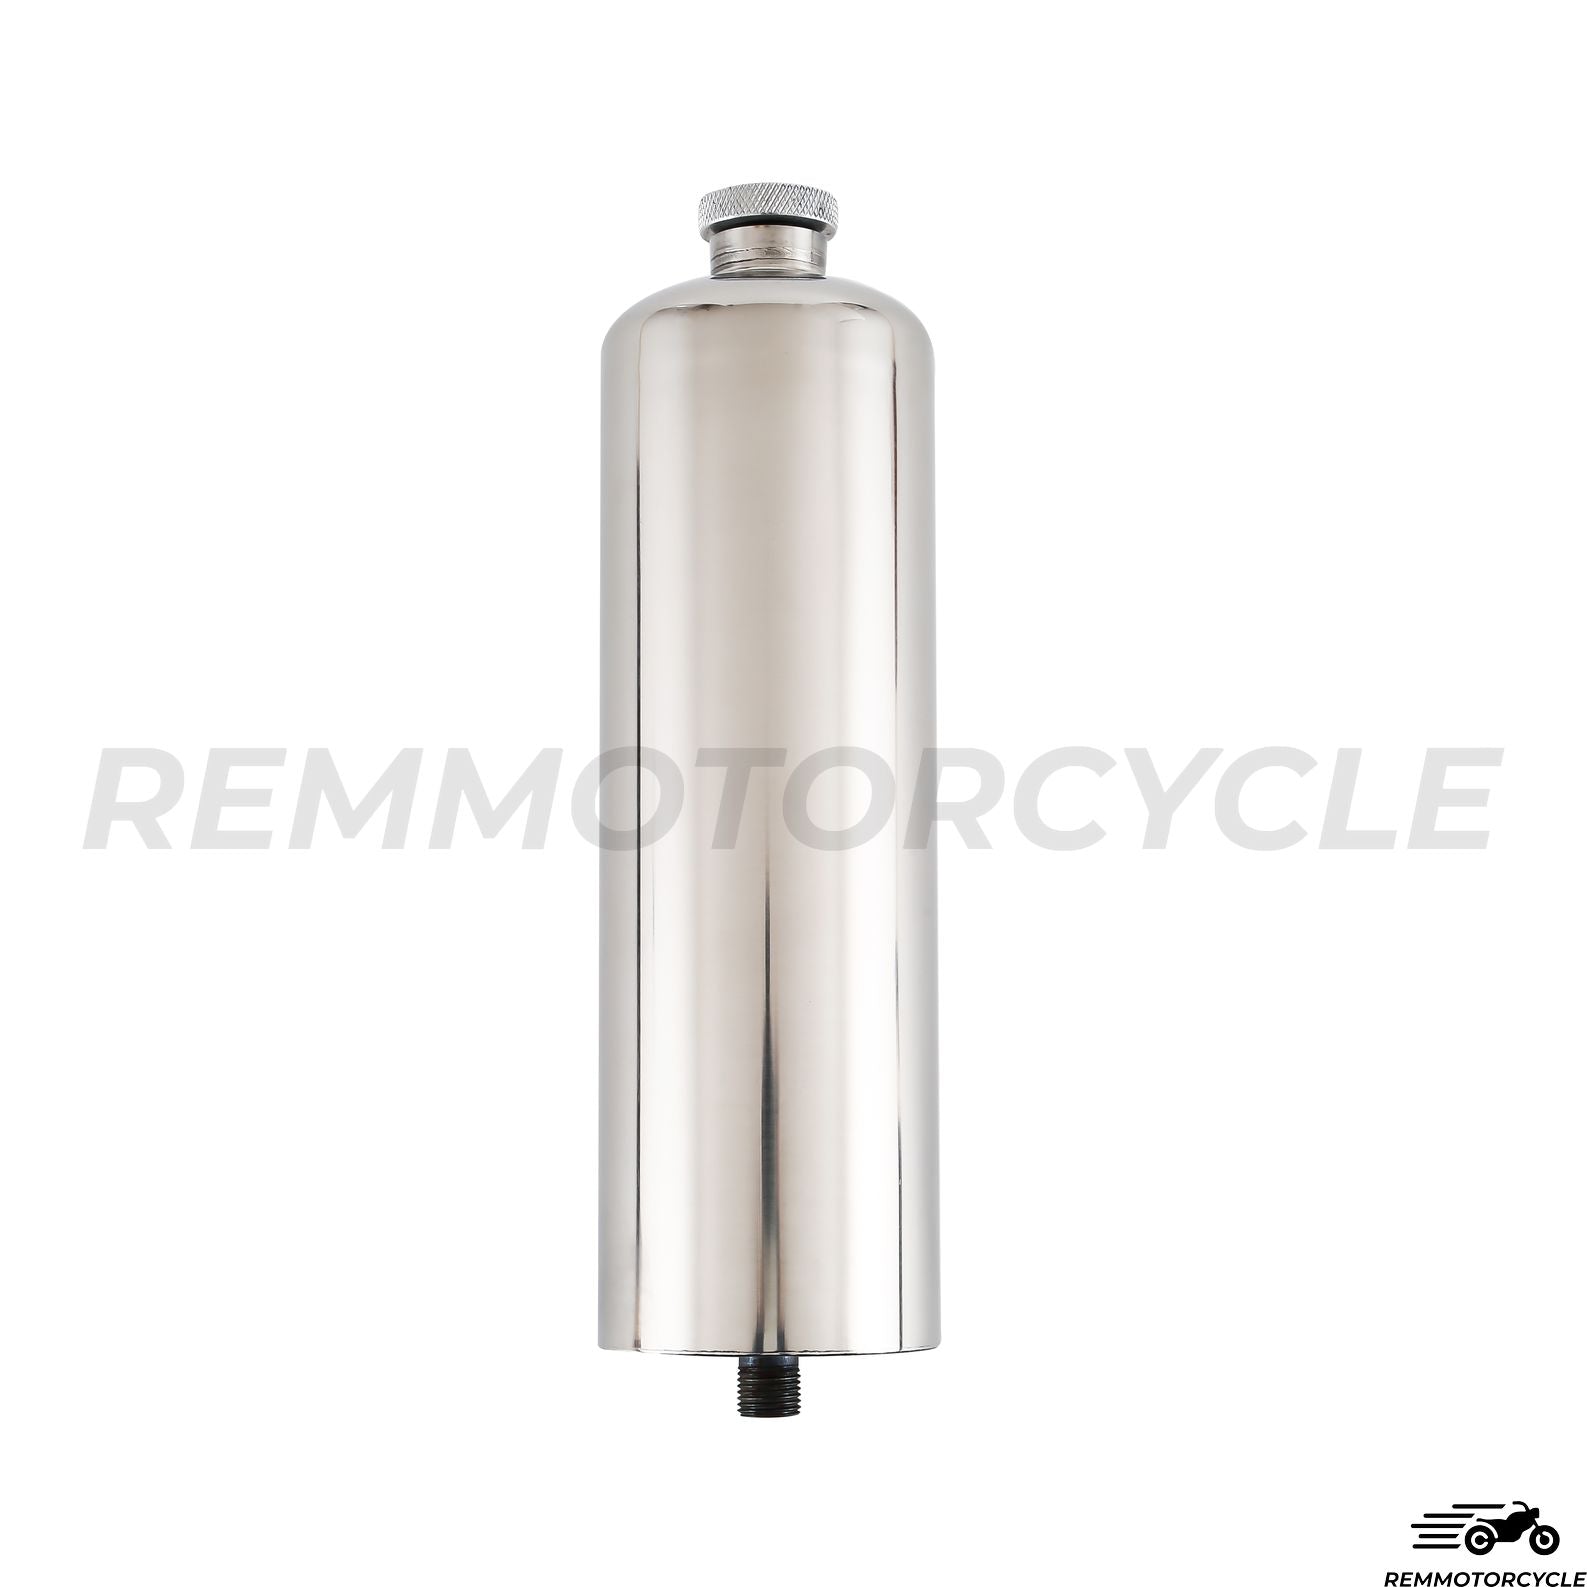 Additional motorcycle tank type Bottle Cap with tap and support